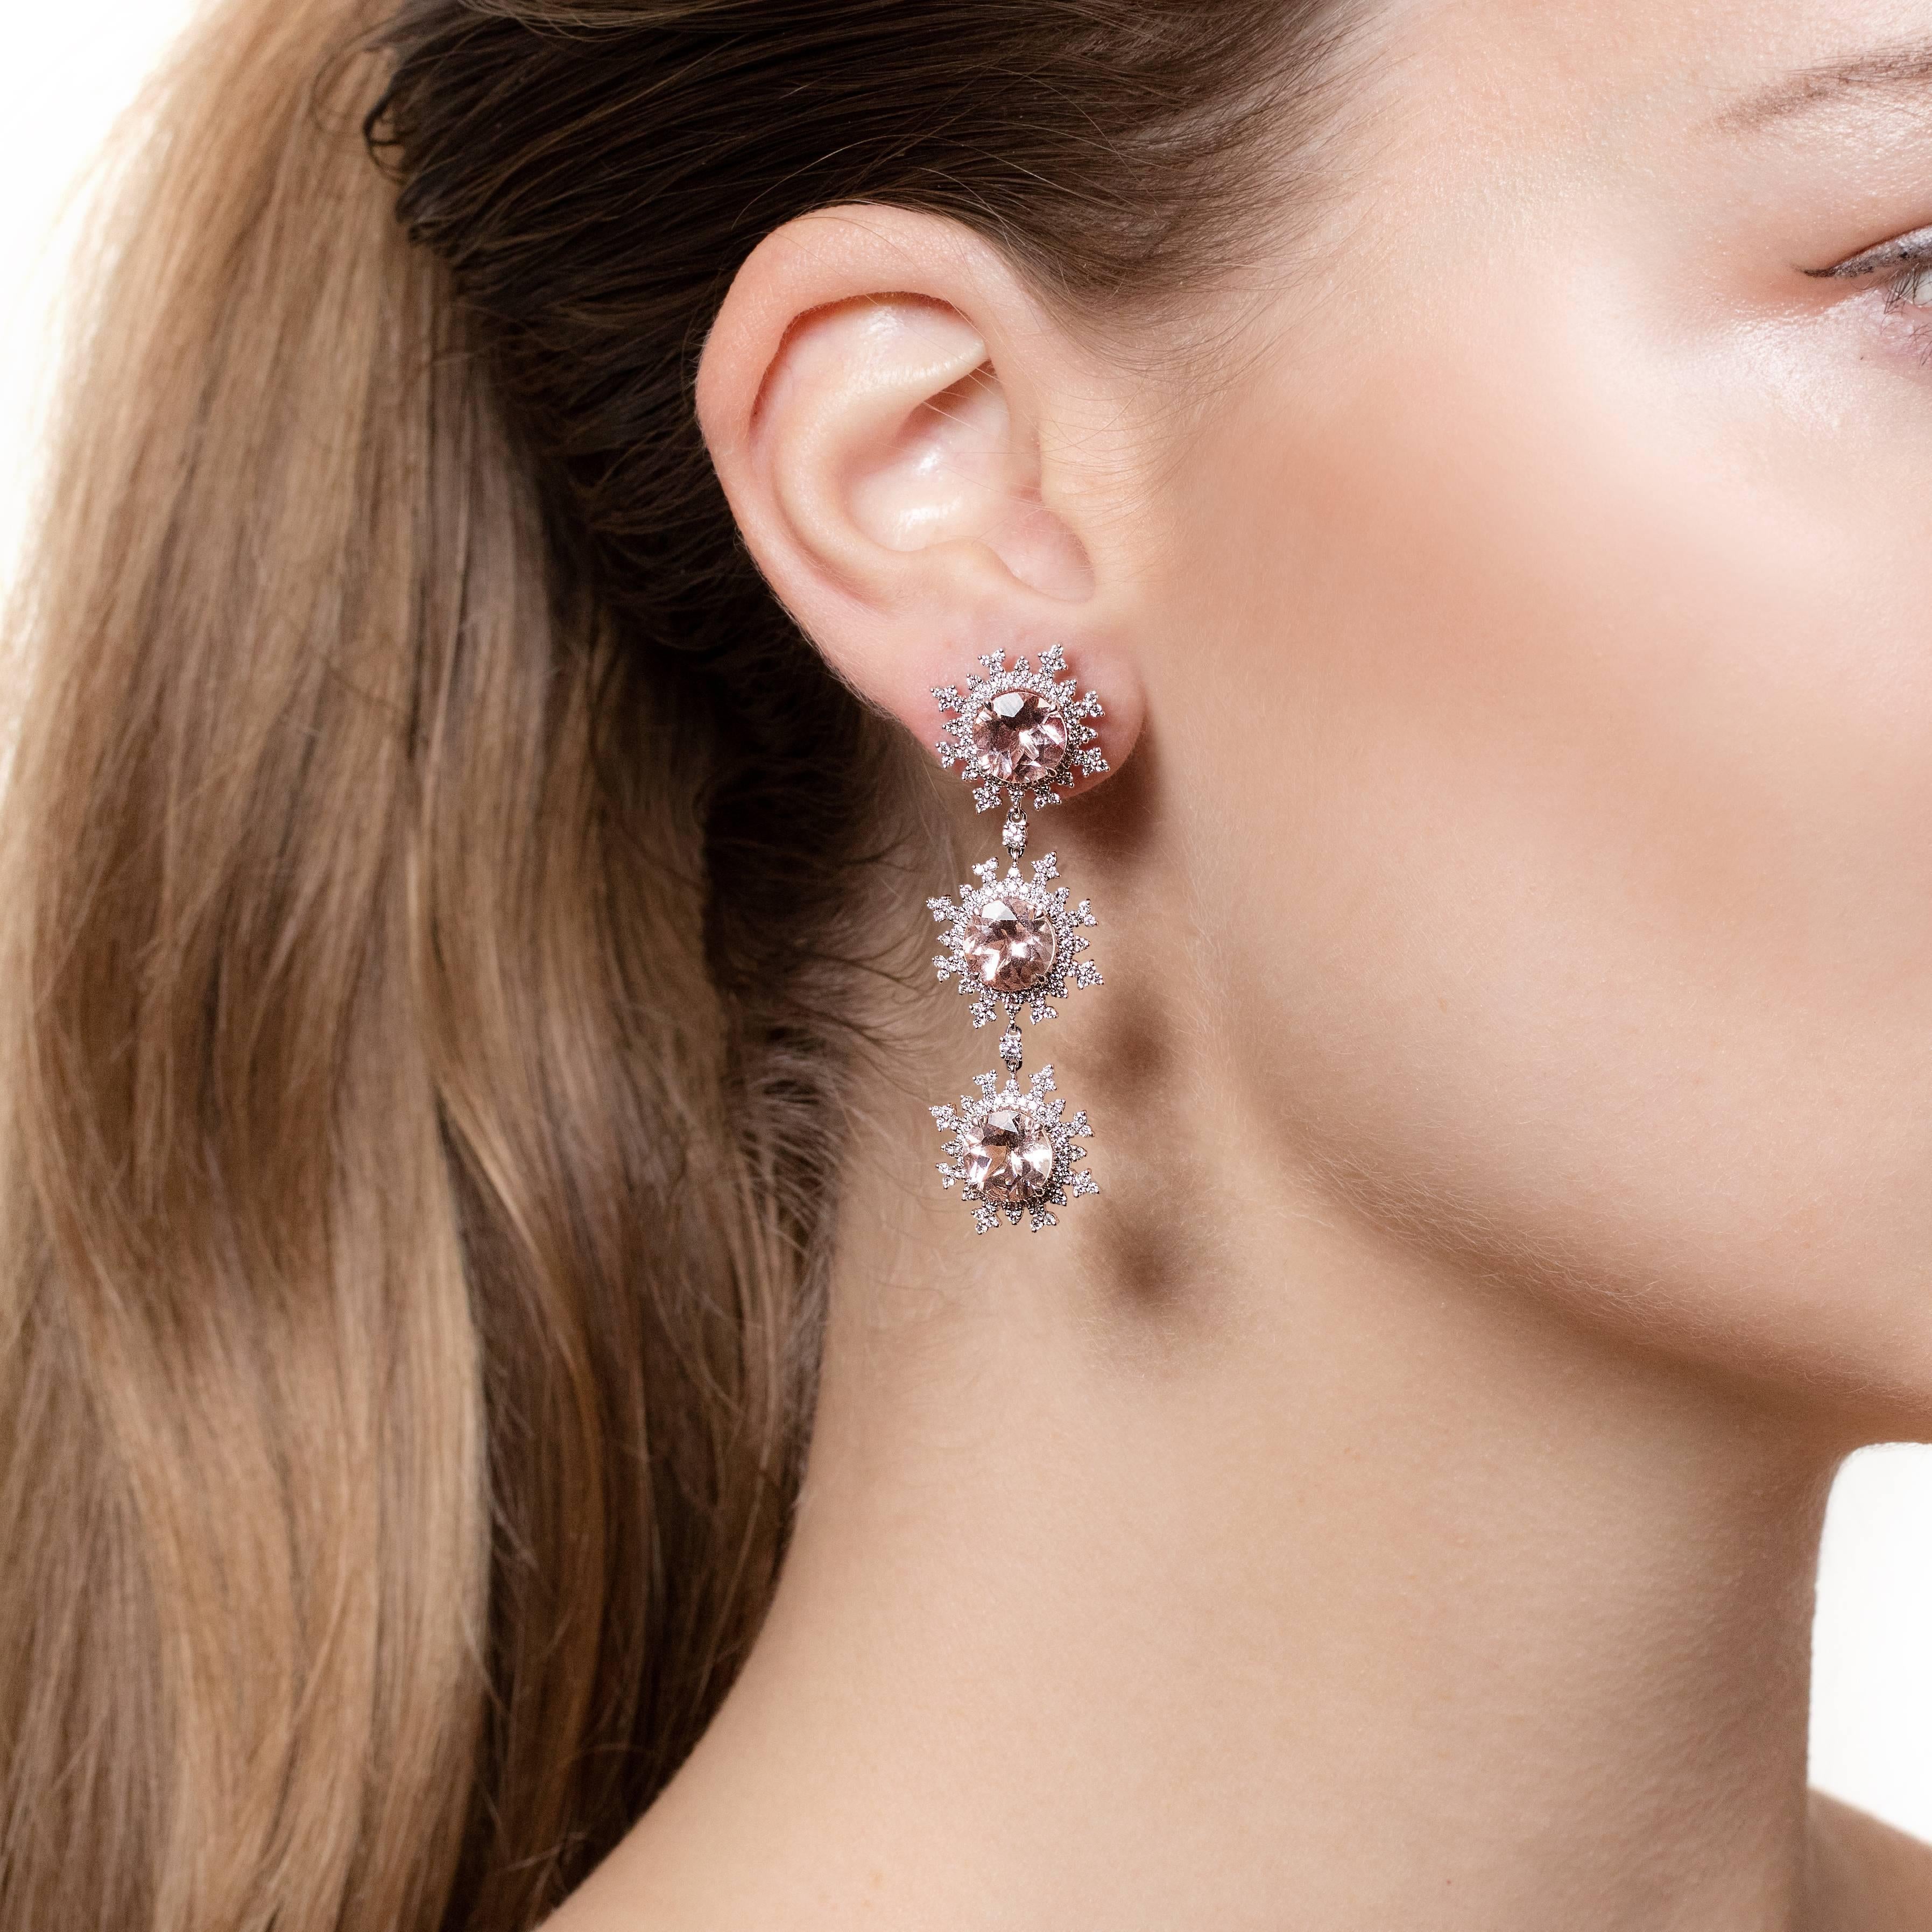 A stunning pair of long detachable flake earrings that are made from 18K white gold and pale pink morganites and surrounded by 388 diamonds. They are part of Nadine Aysoy’s Tsarina Collection where nature is an incredible source of inspiration for